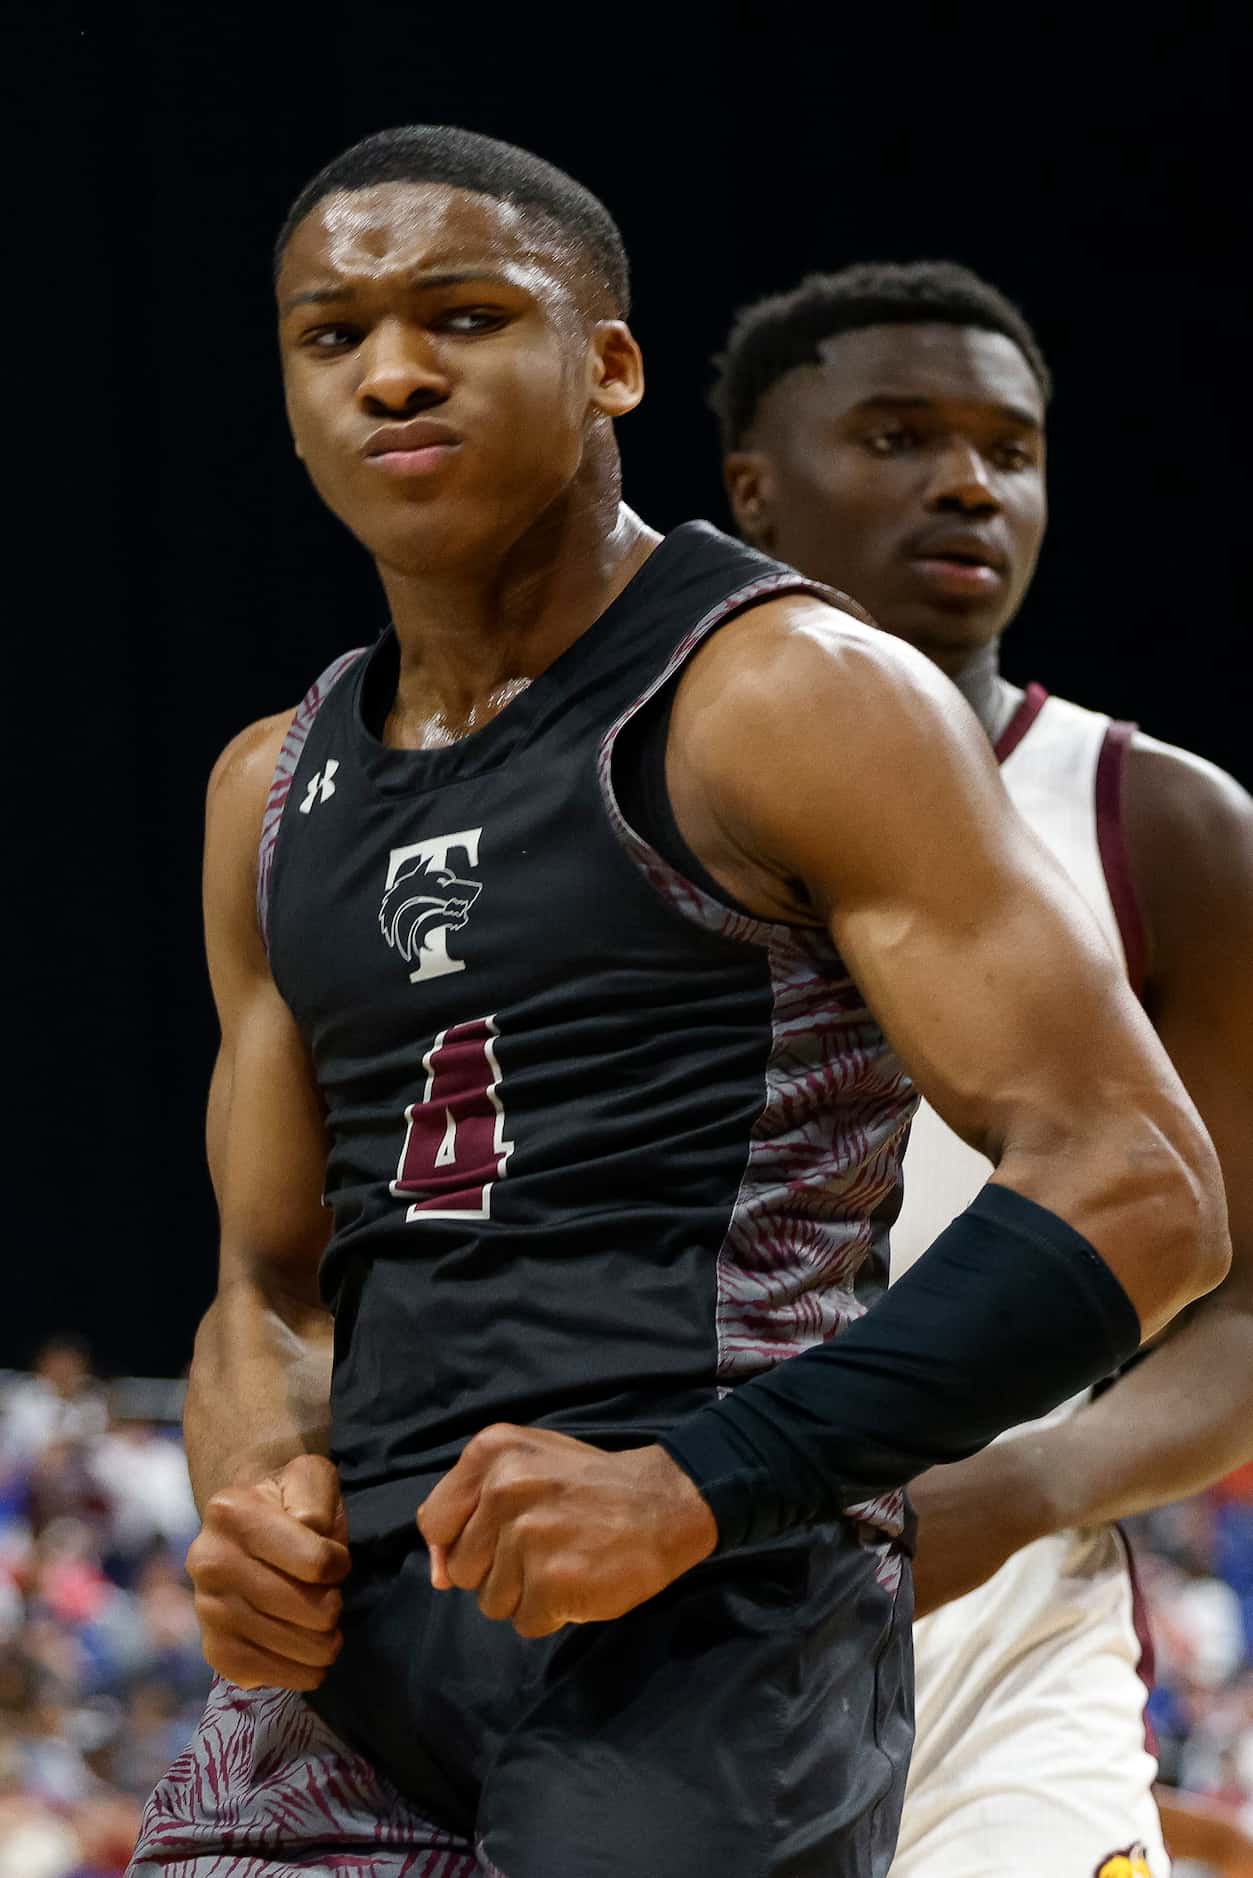 Mansfield Timberview guard Donovan O'Day (4) flexes after a called foul against Beaumont...